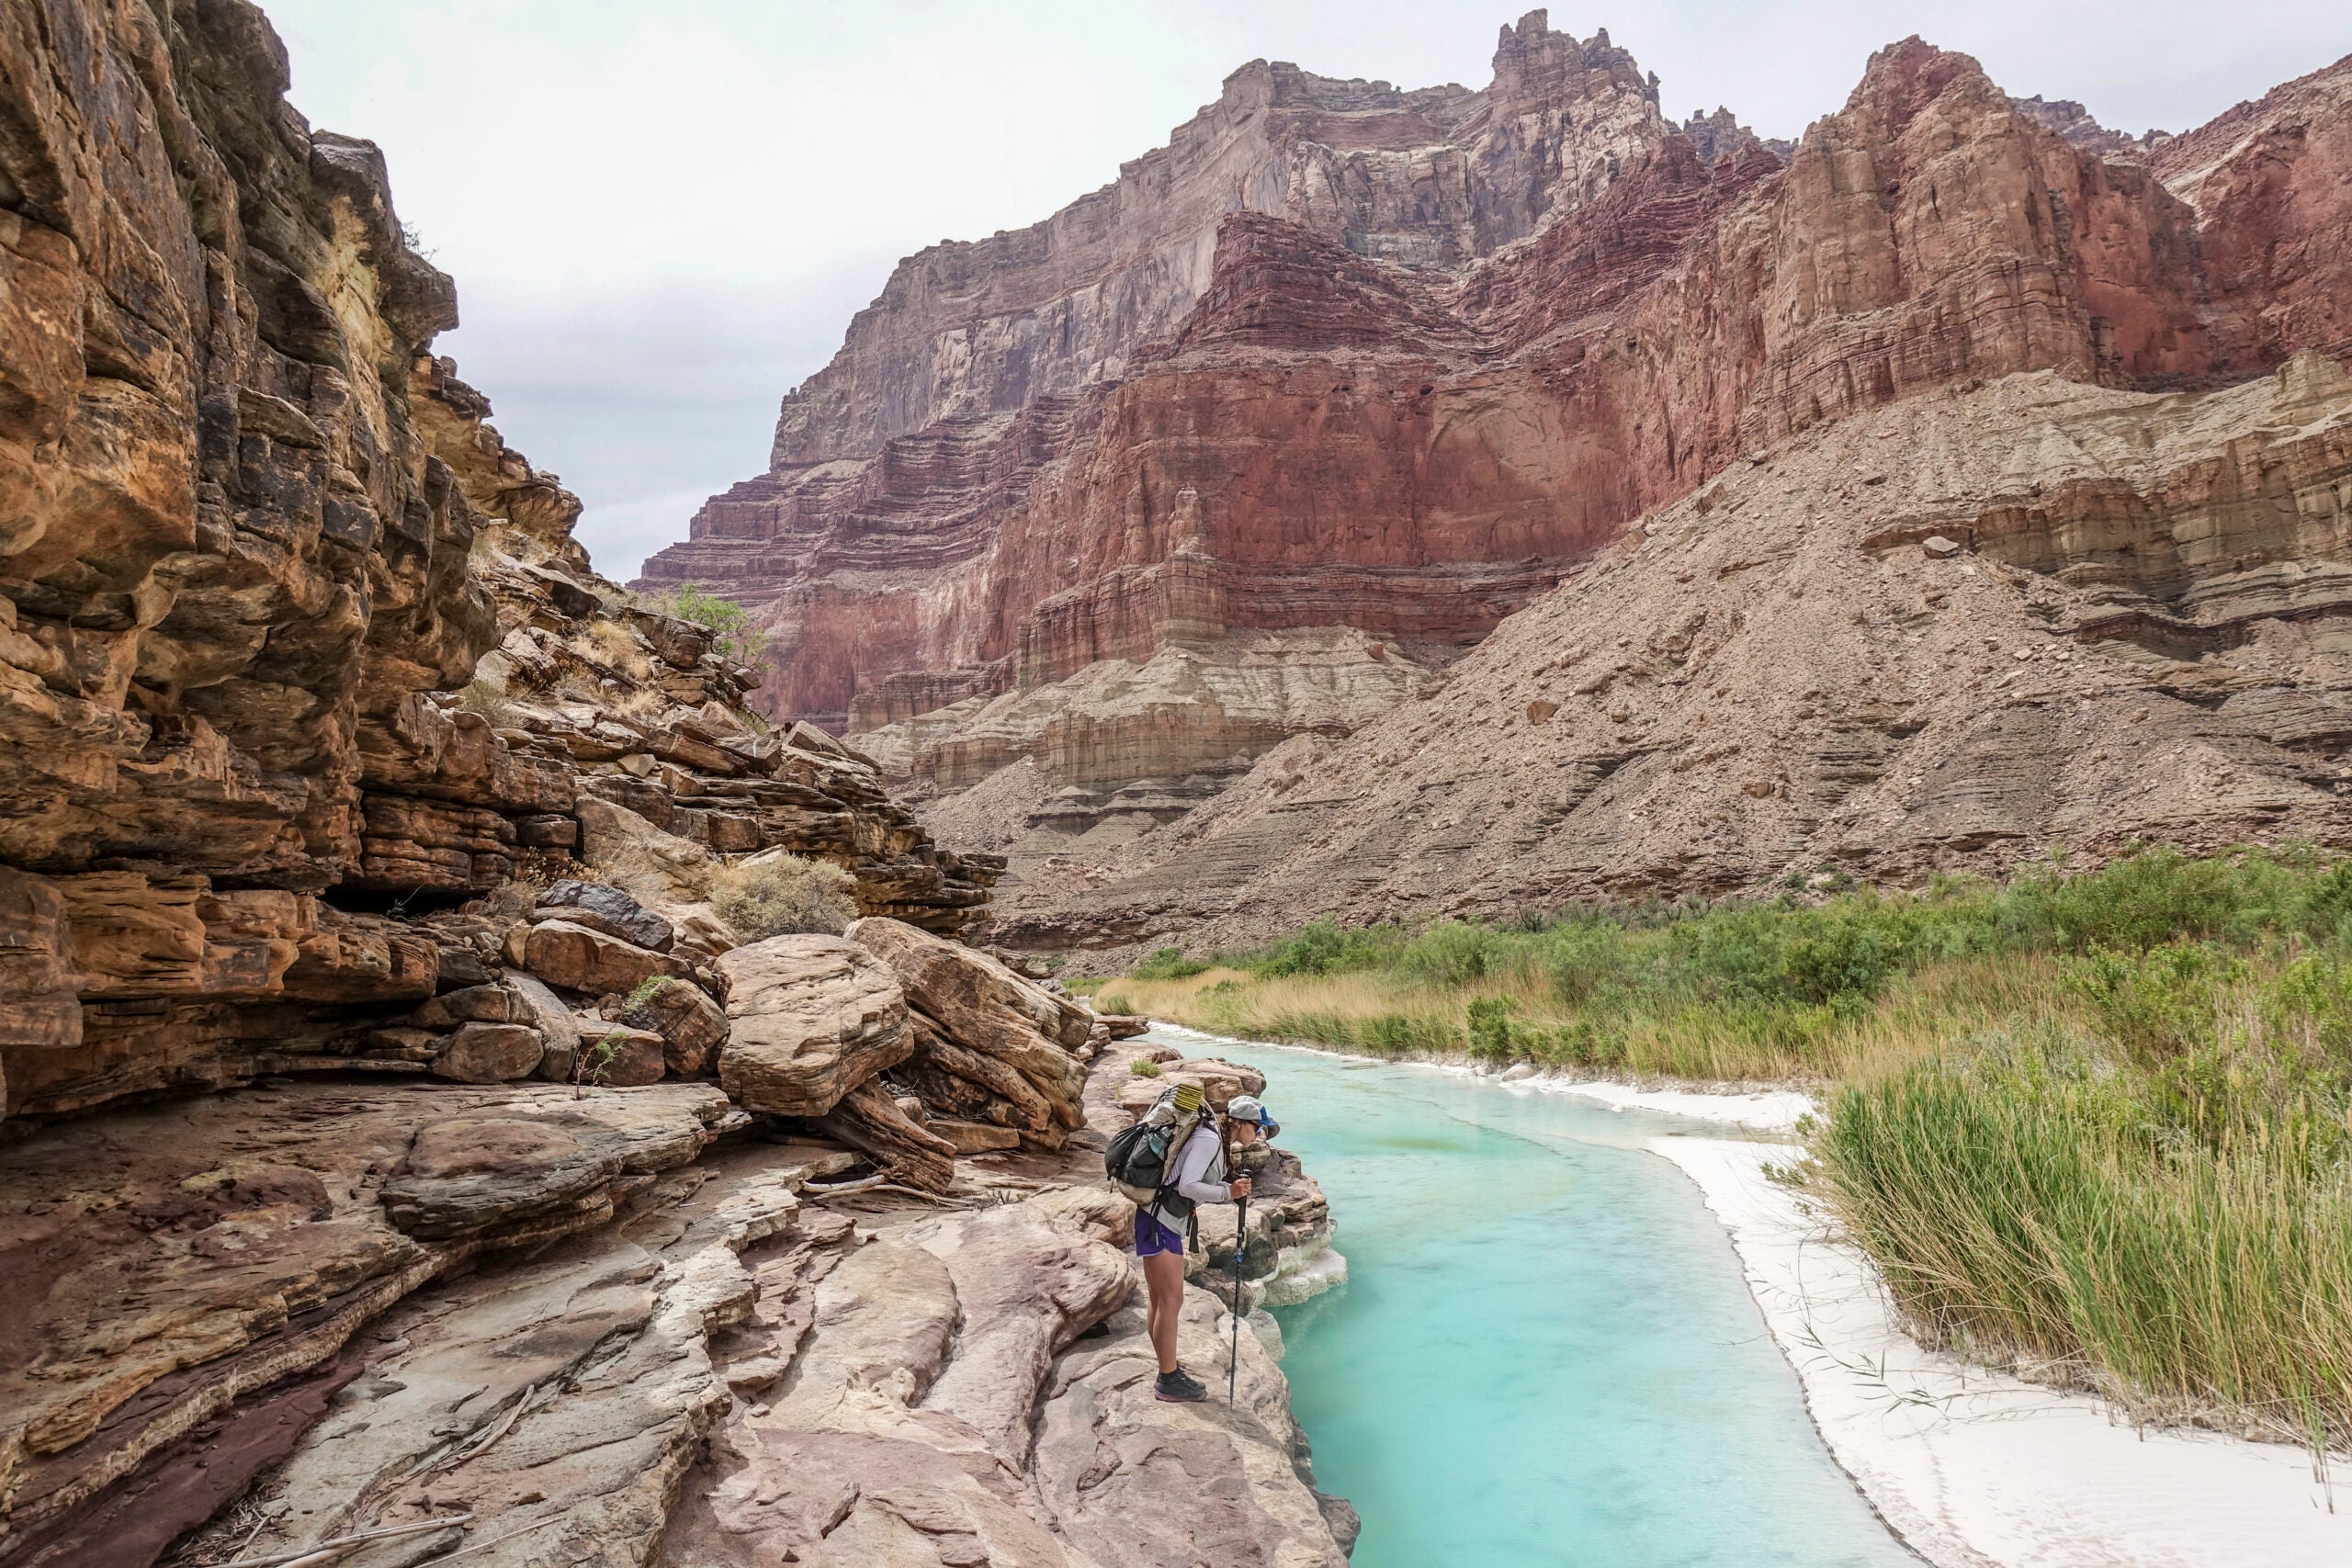 The milky turquoise waters of Little Colorado River near its confluence with the Colorado River in the Grand Canyon
(Getty Images)